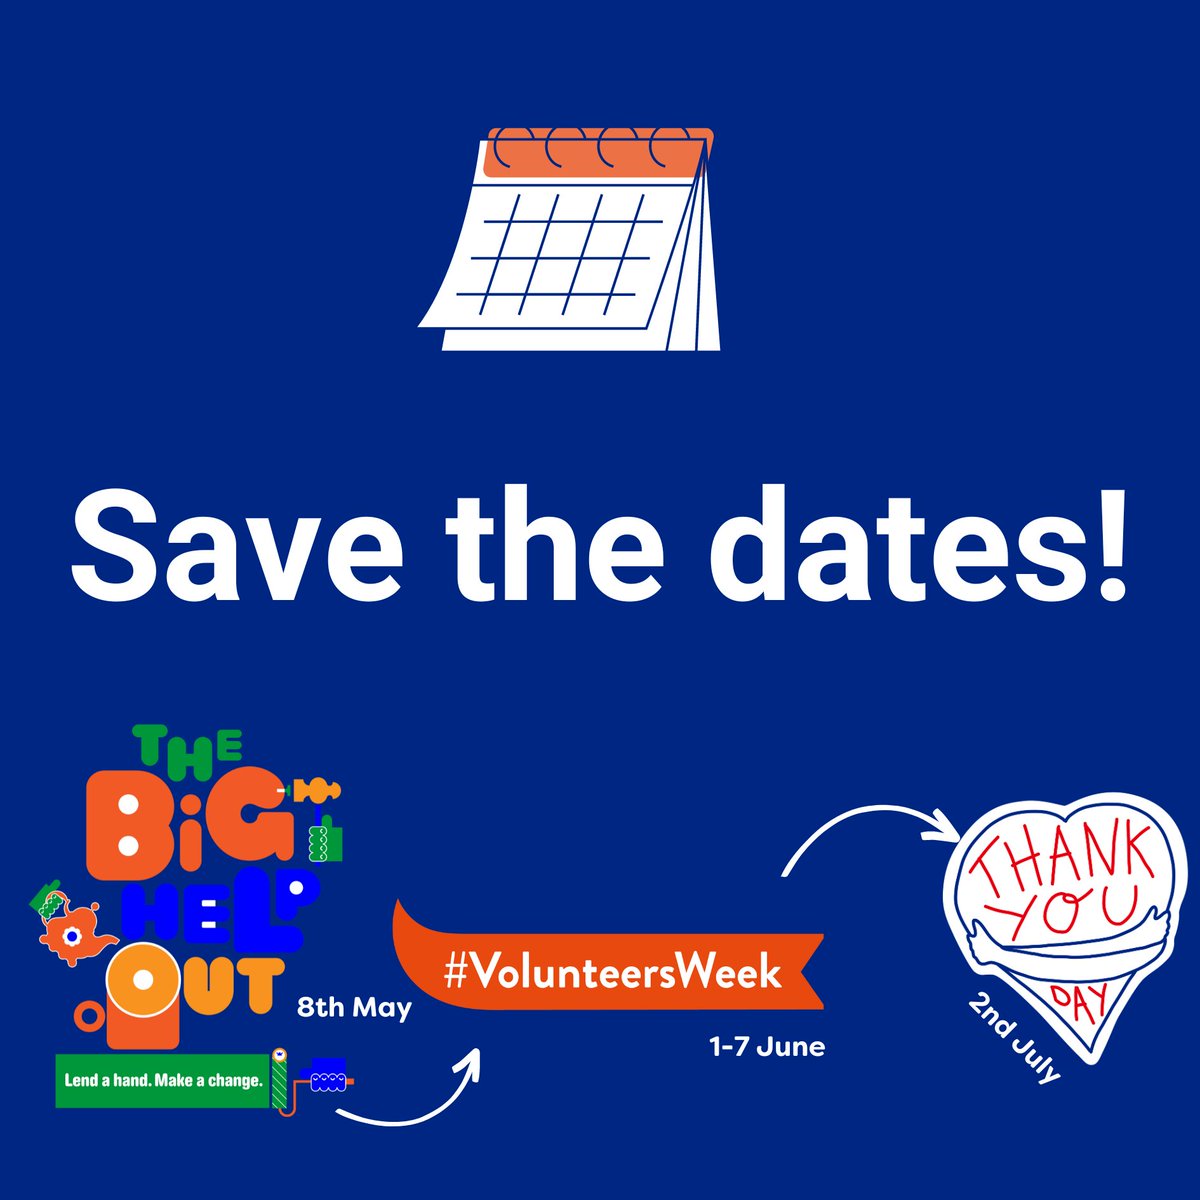 Psstttt... save the dates! 🗓️
There are plenty of opportunities to carry on volunteering coming up!
👉 1-7 June: Volunteers' Week
👉 2 July: Thank You Day

 #TheBigHelpOut #ThankYouDay #VolunteersWeek @thankyouday_ @ncvovolunteers